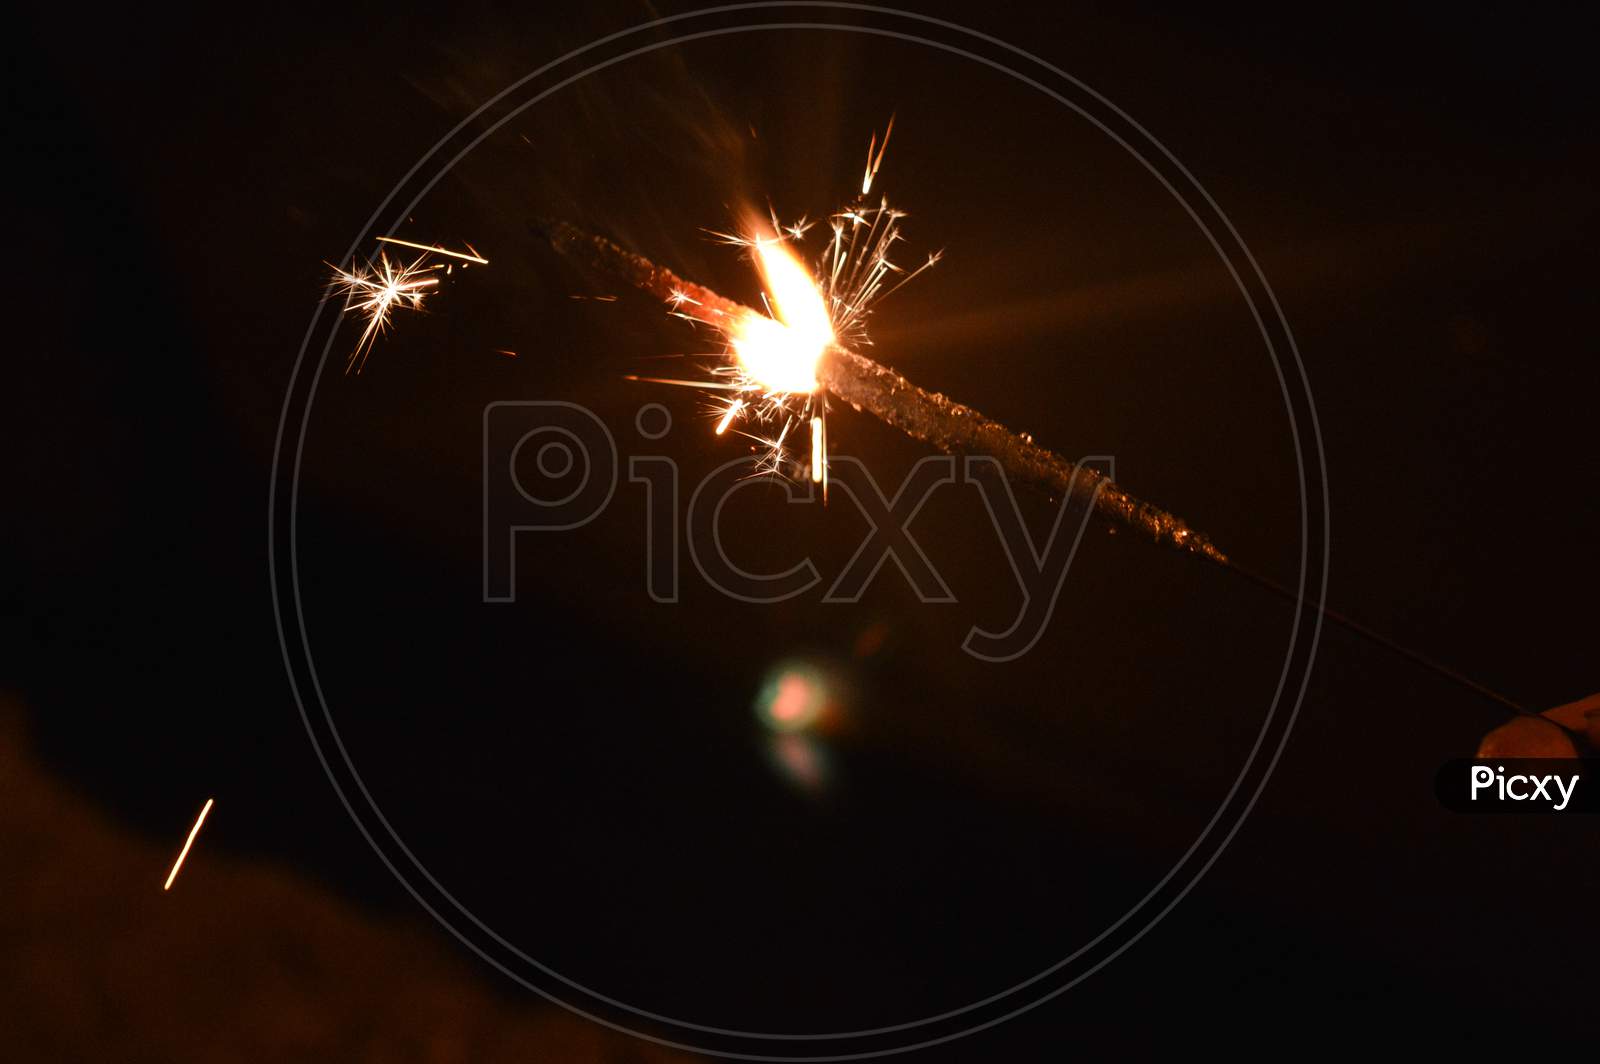 Indian Lady Playing With Fire Cracker Rose And Candle On Indian Festival Diwali Deepawali With Fire Isolated On Table